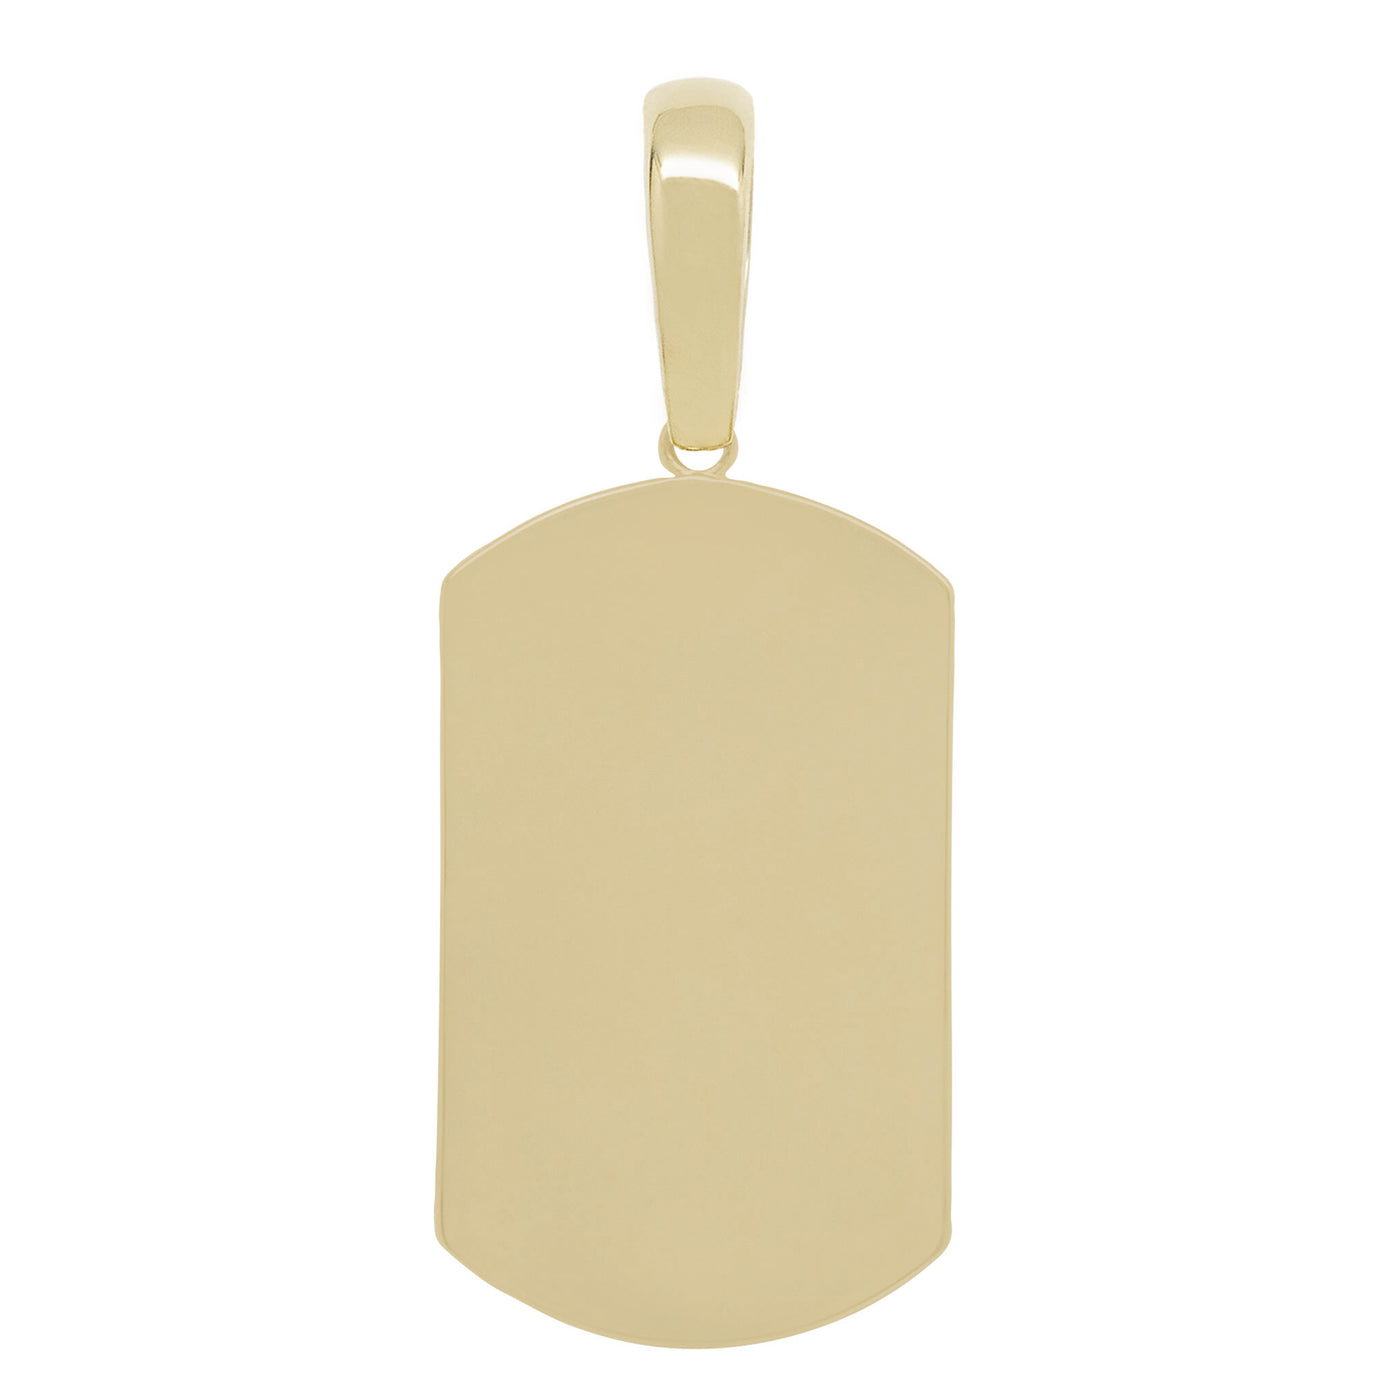 1 3/4" Plain Dog Tag Pendant Solid 10K Yellow Gold